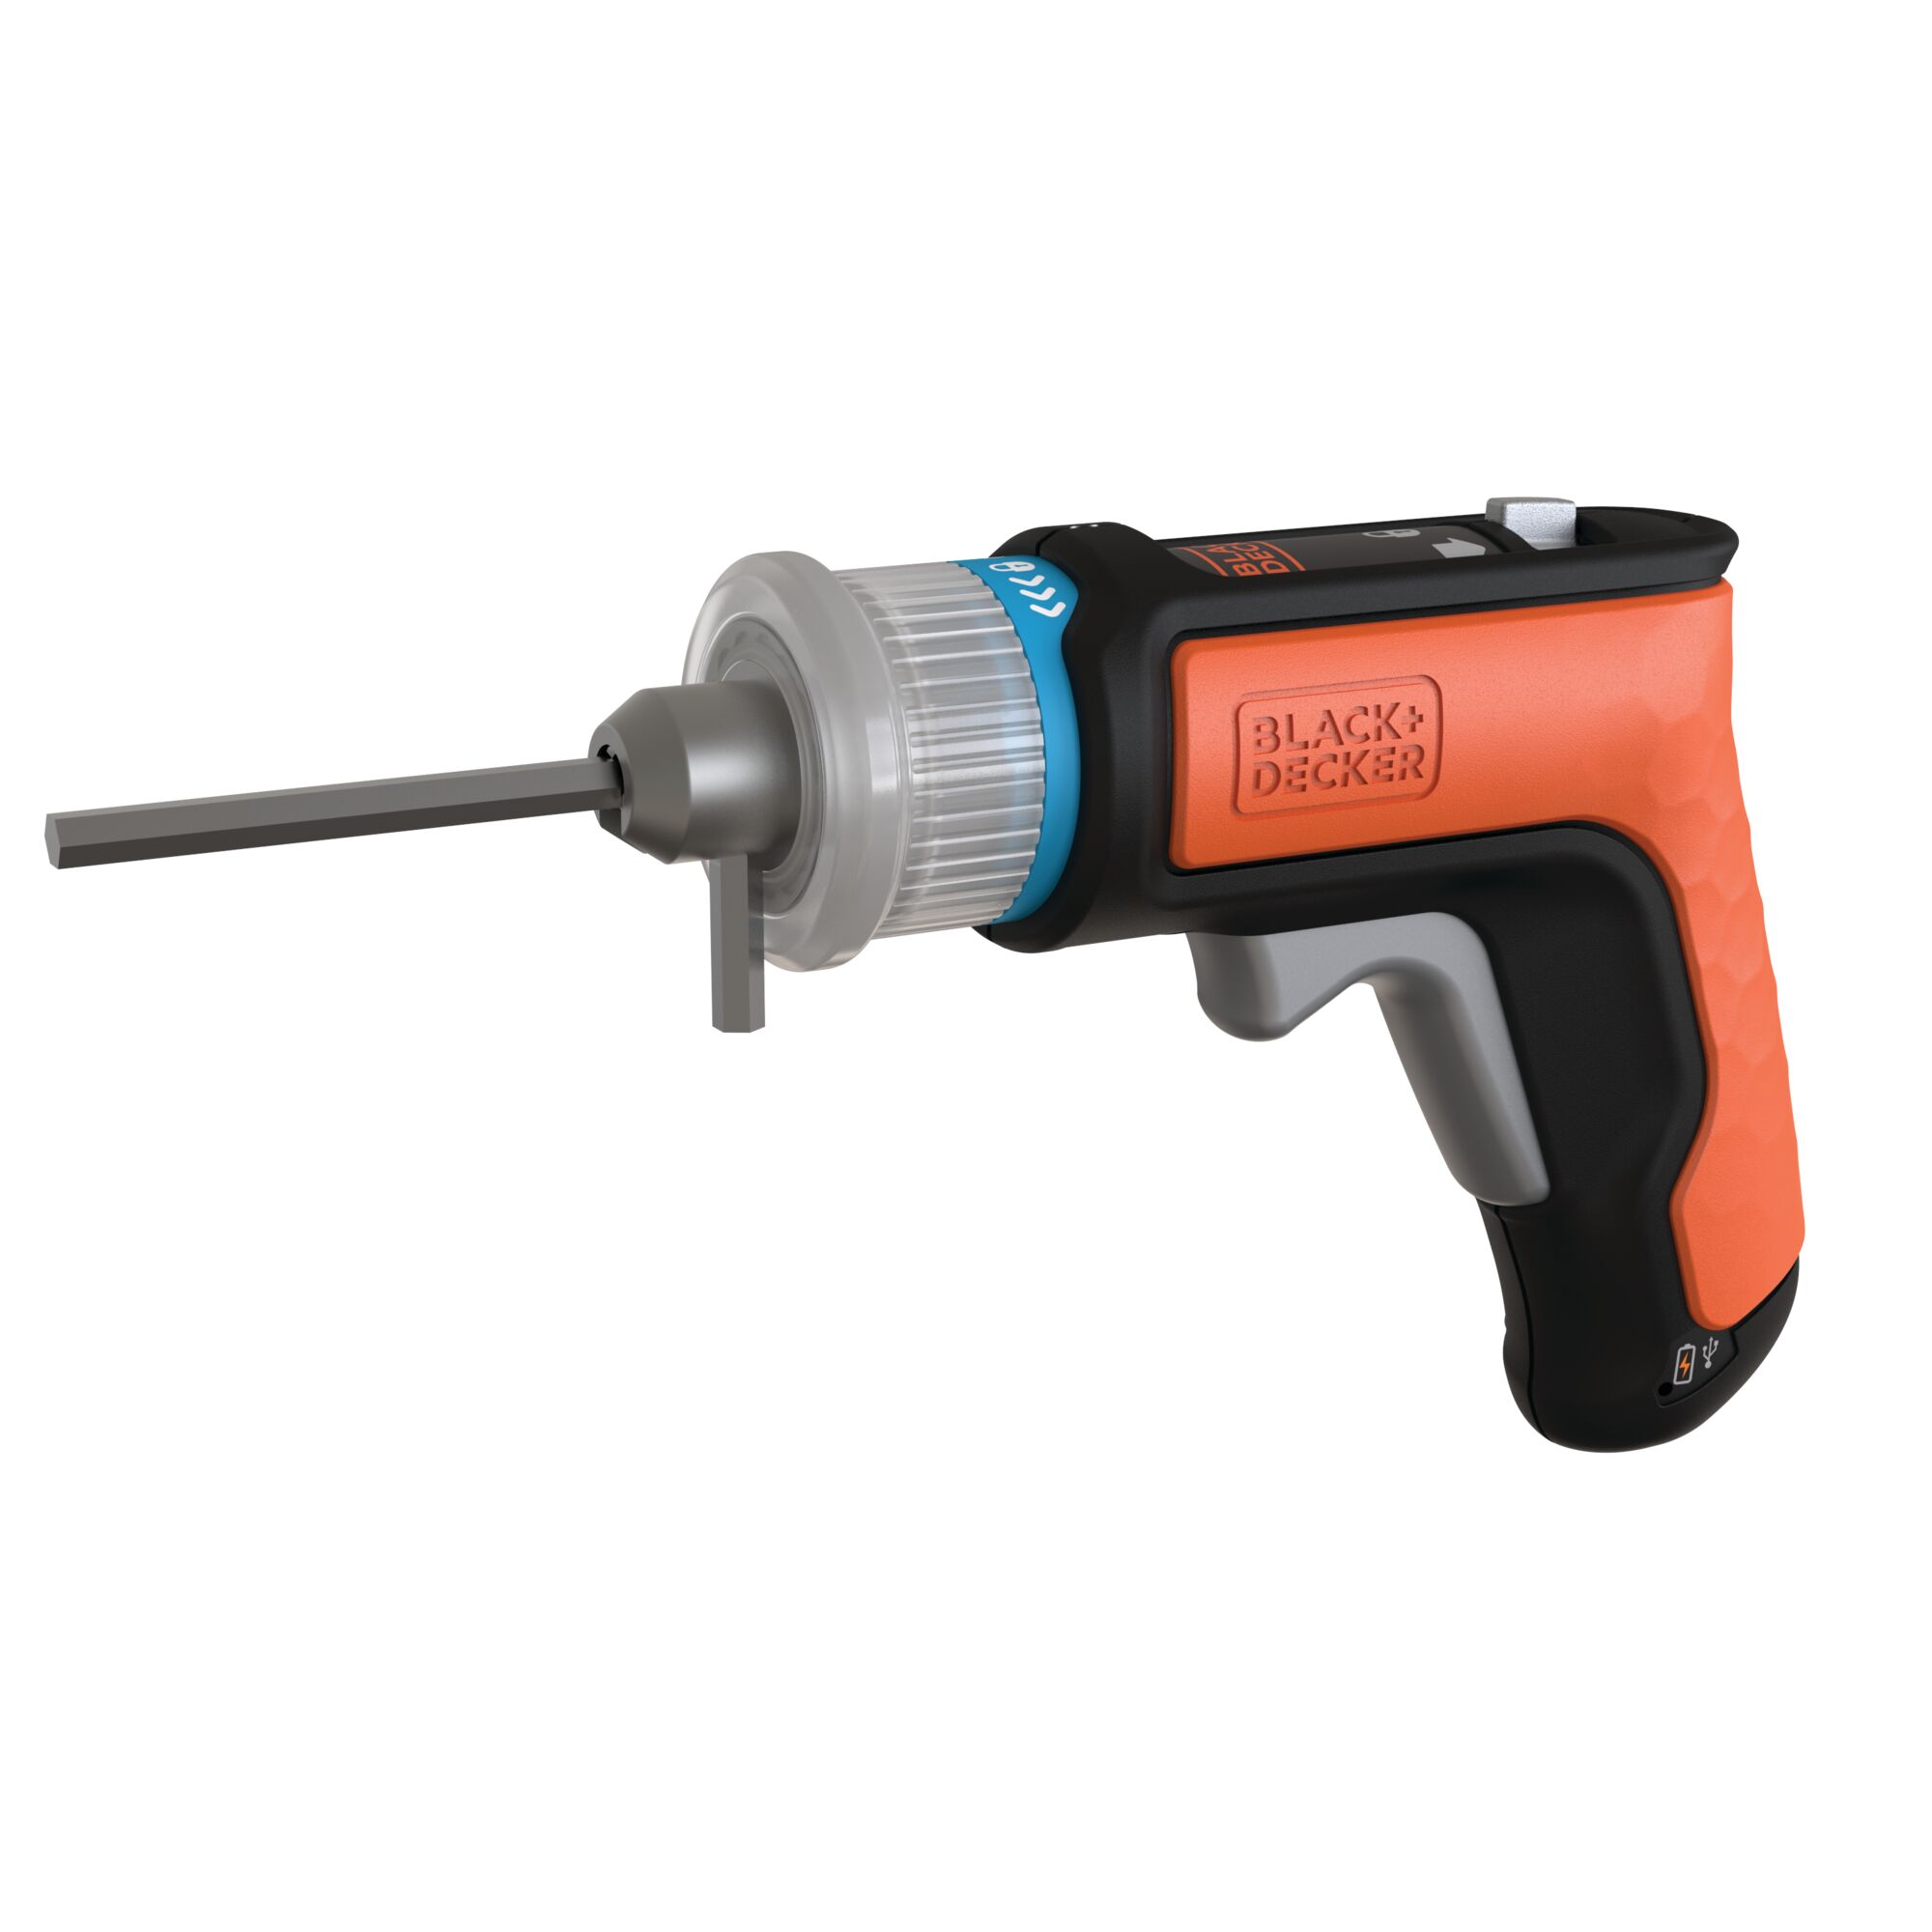 HEX DRIVER Cordless Furniture Assembly Tool Screwdriver.